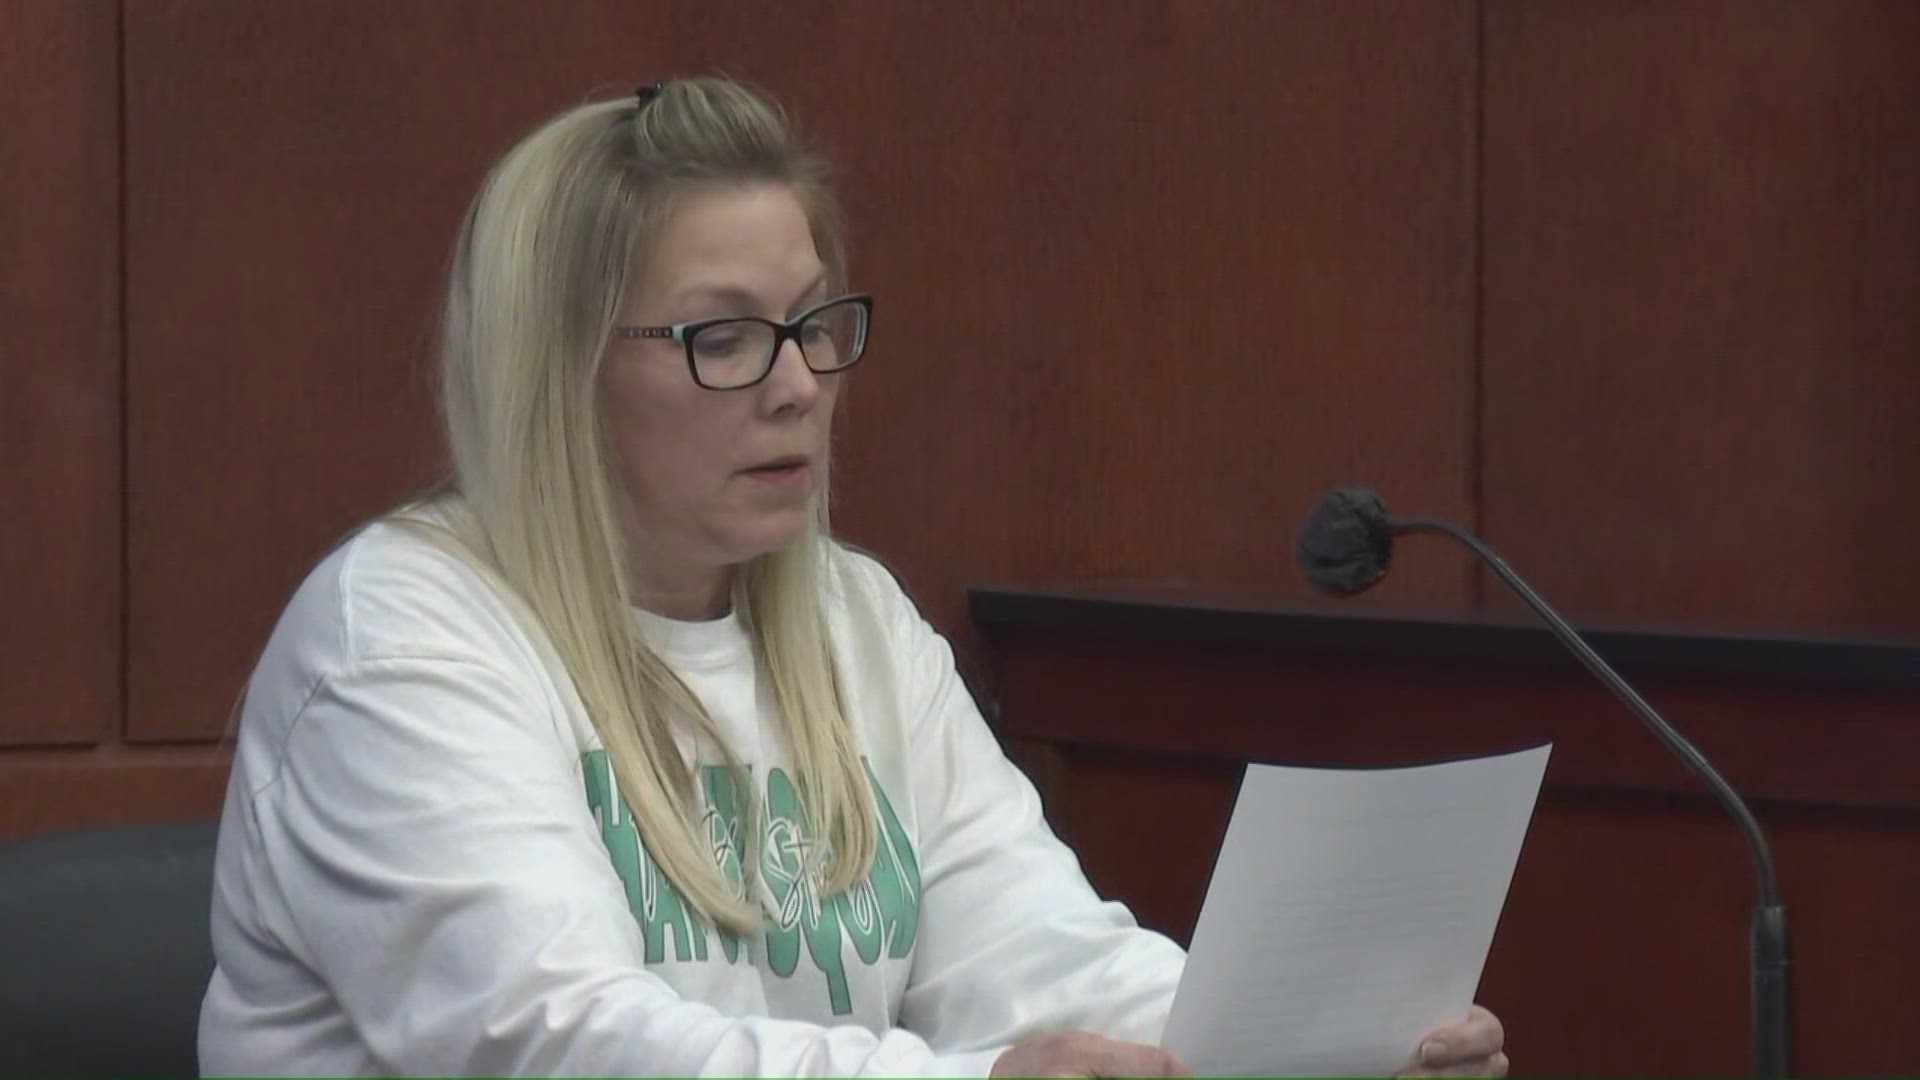 Stacy Bailey emotionally addressed the St. Johns County courtroom and Crystal Smith after her sentencing.